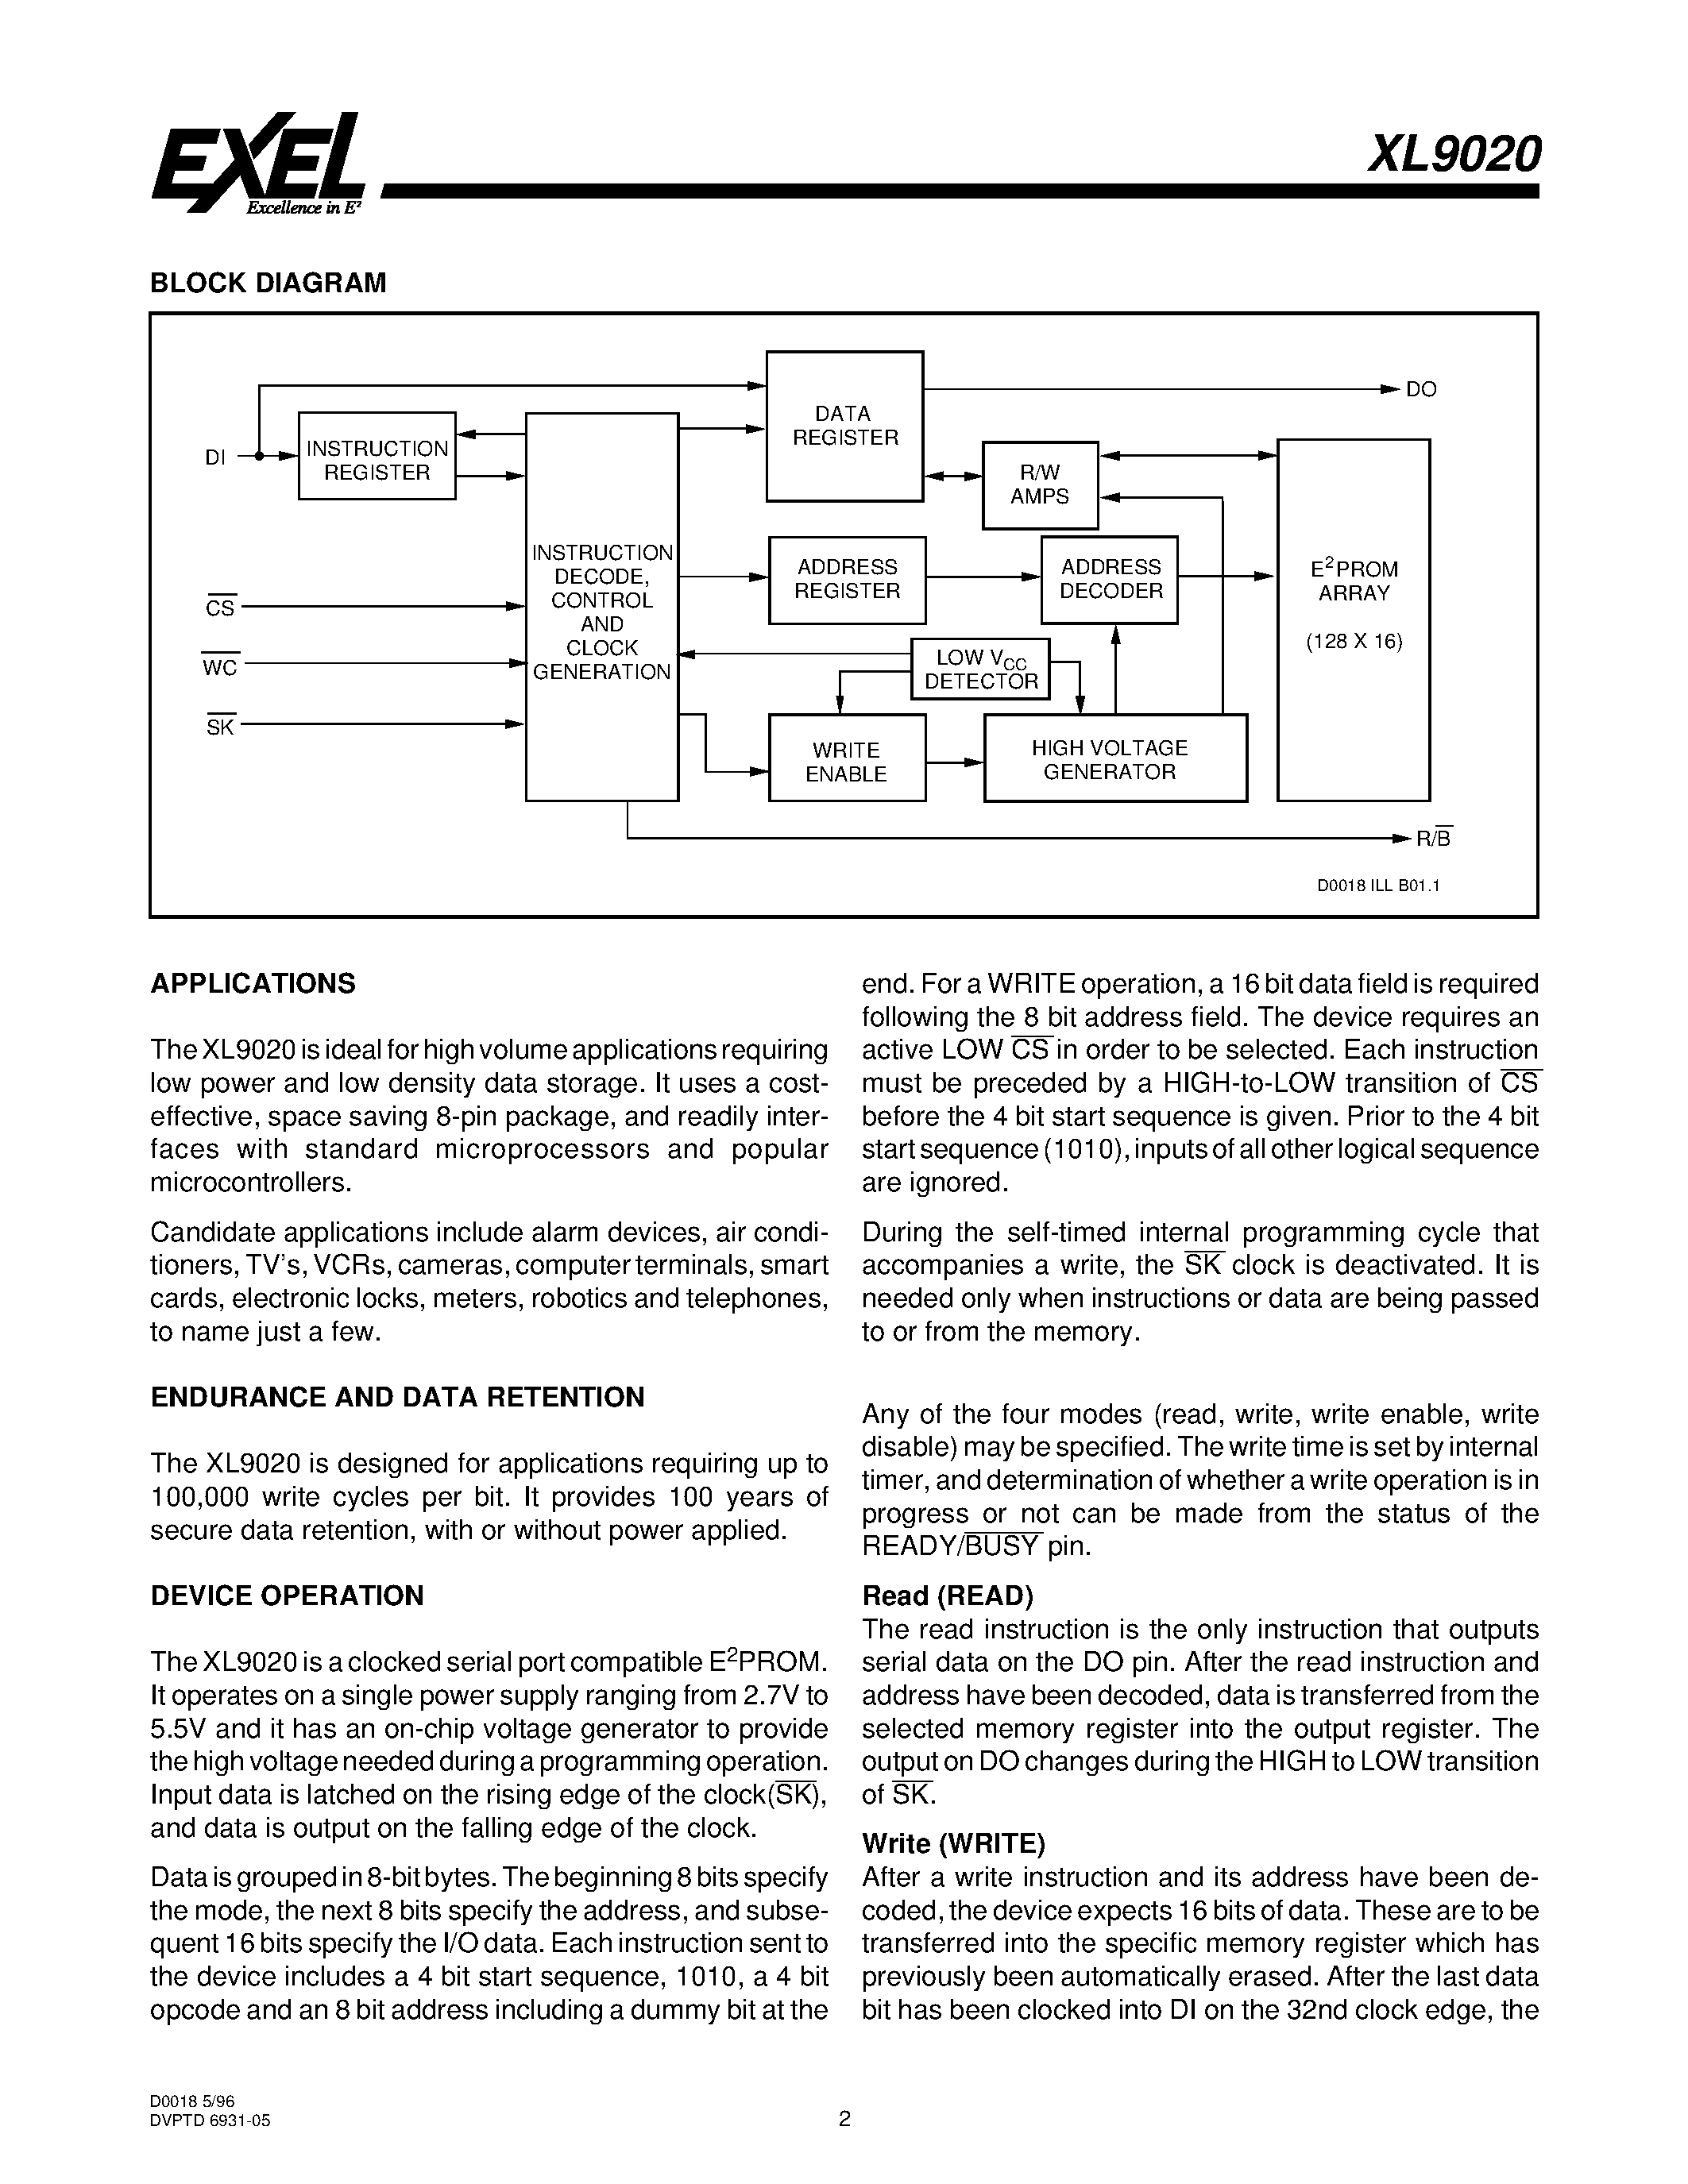 Datasheet XL9020F - 2/048-Bit Serial Electrically Erasable PROM 2.7 to 5.5 Volt Operation page 2